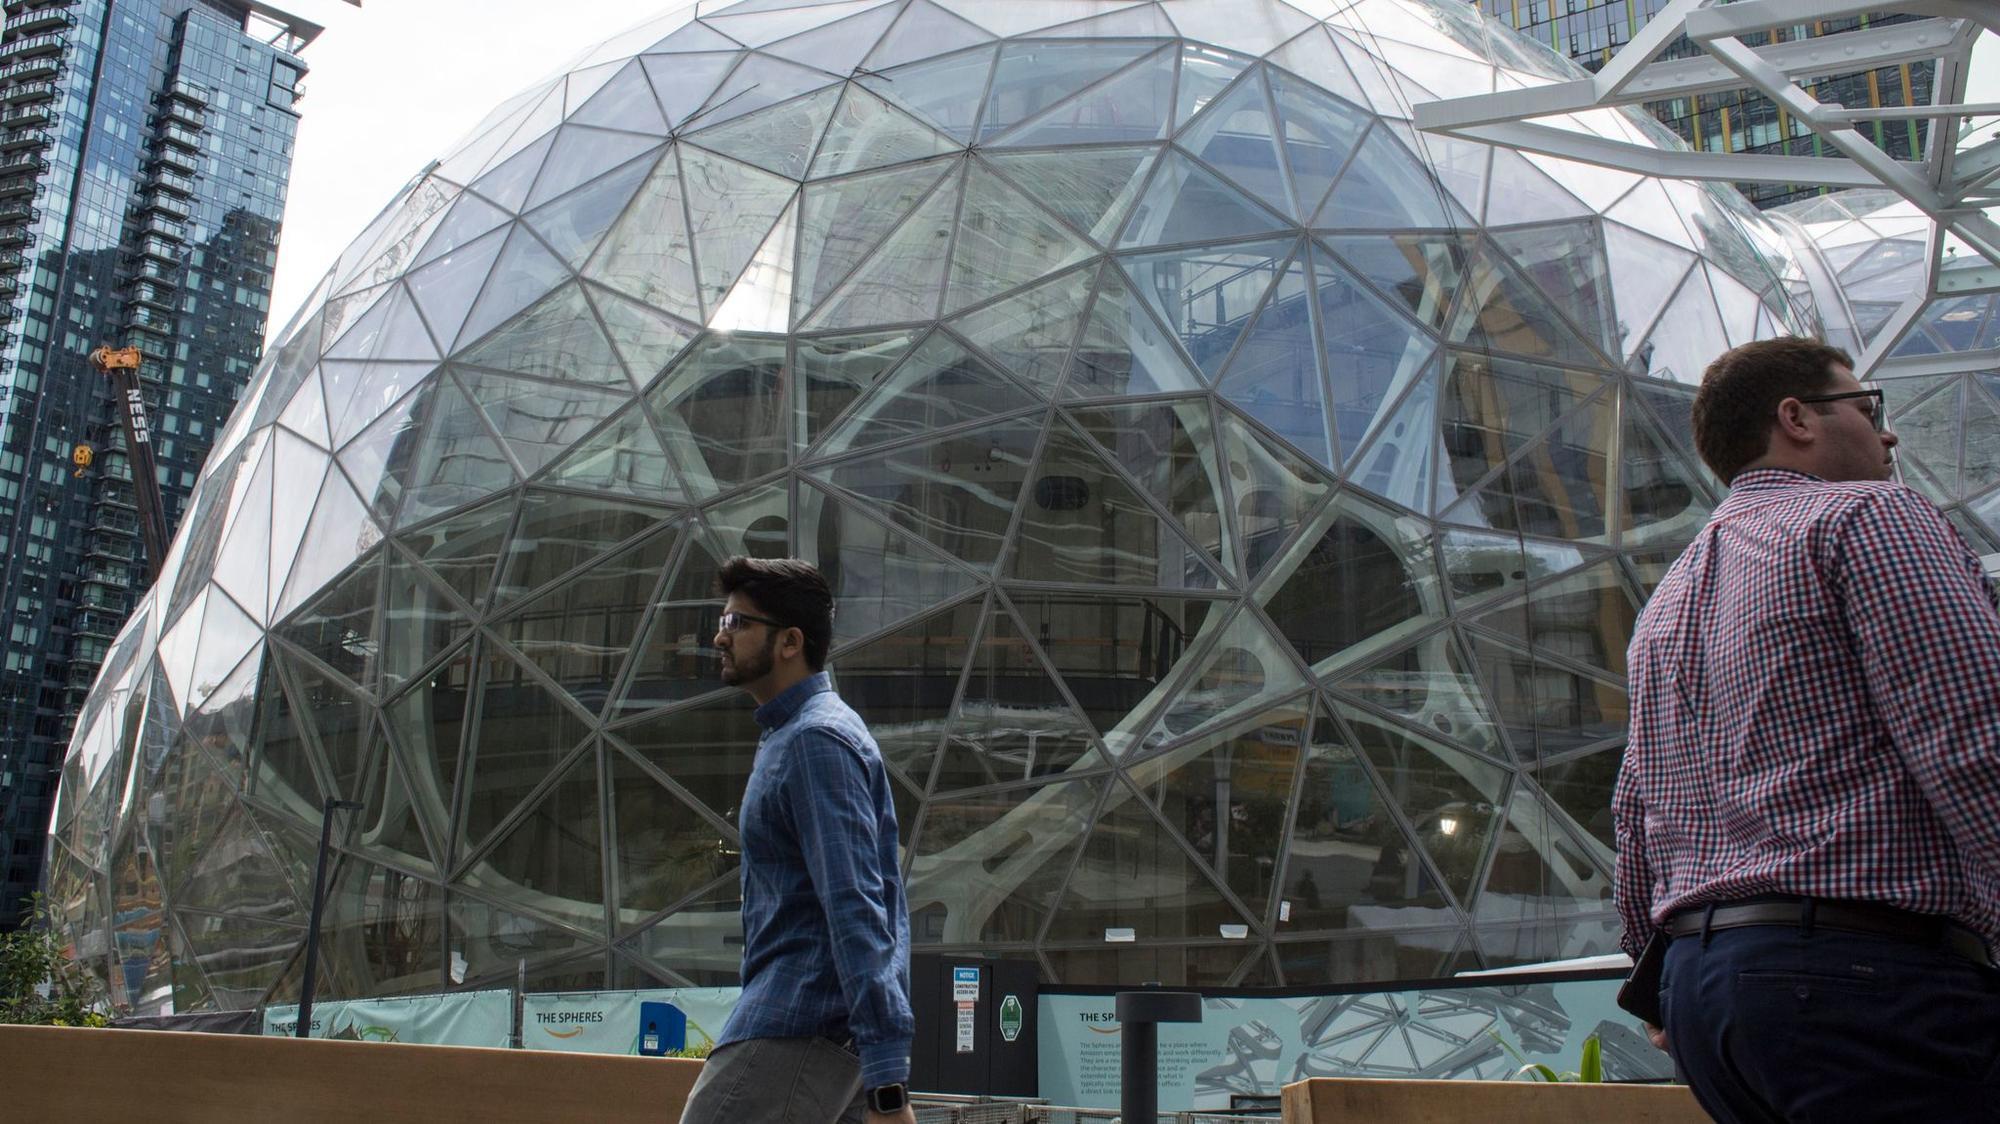 As bids for Amazon's headquarters come due, tech has a chance to spread the wealth ...2000 x 1124